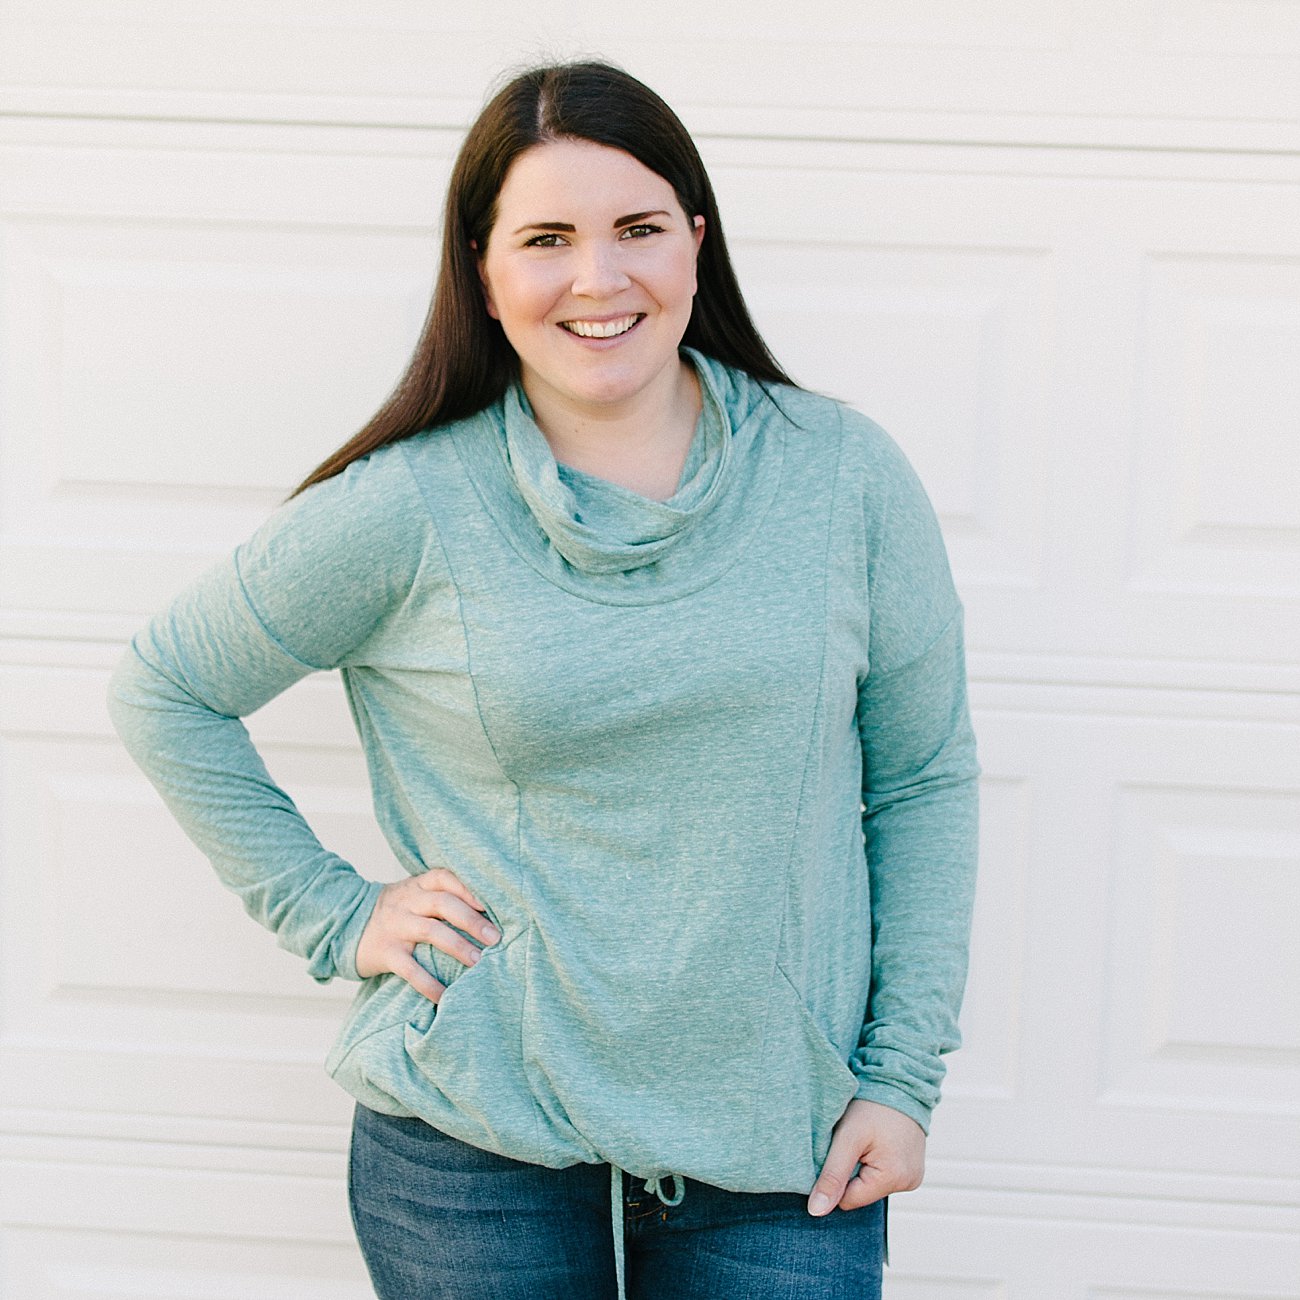 Ink Love & Peace "Calyn Cowl Neck Knit Pullover" - Size L - $64 (Made in the USA) - Stitch Fix Review #48 by North Carolina ethical fashion blogger Still Being Molly